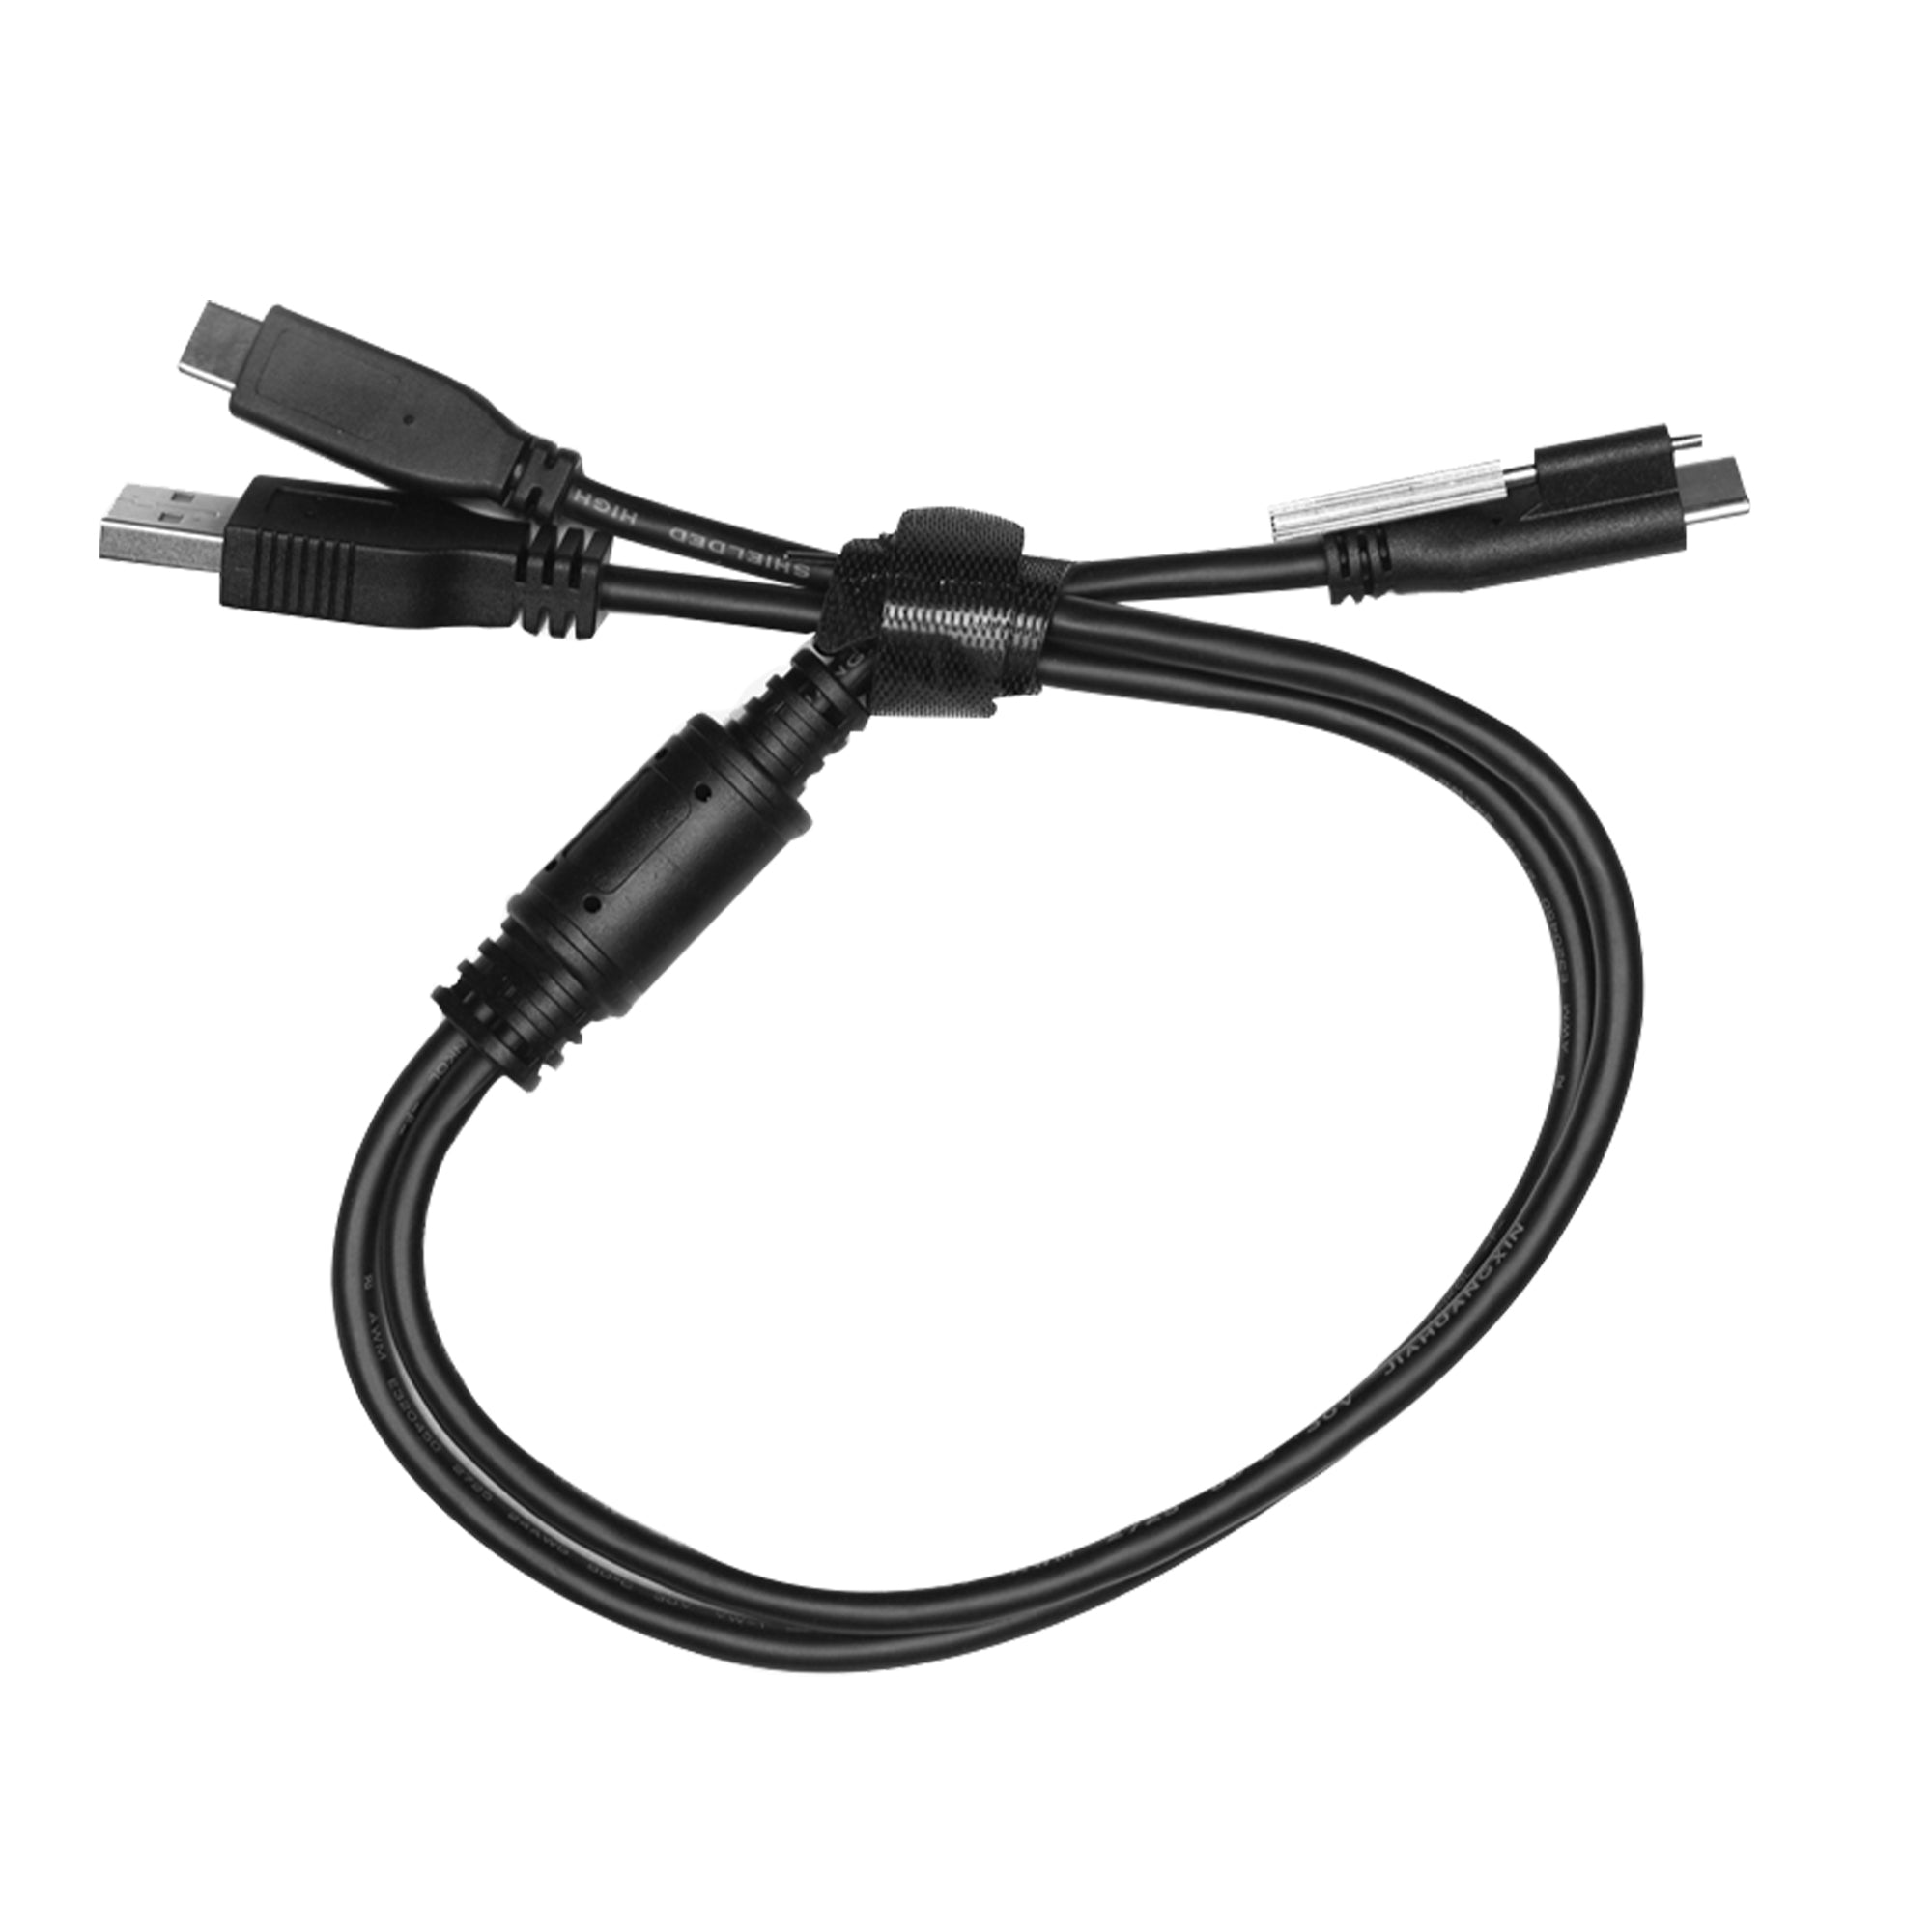 2-in-1 Type-C Mobile Cable for POP 3, RANGE 2, INSPIRE, MINI 2